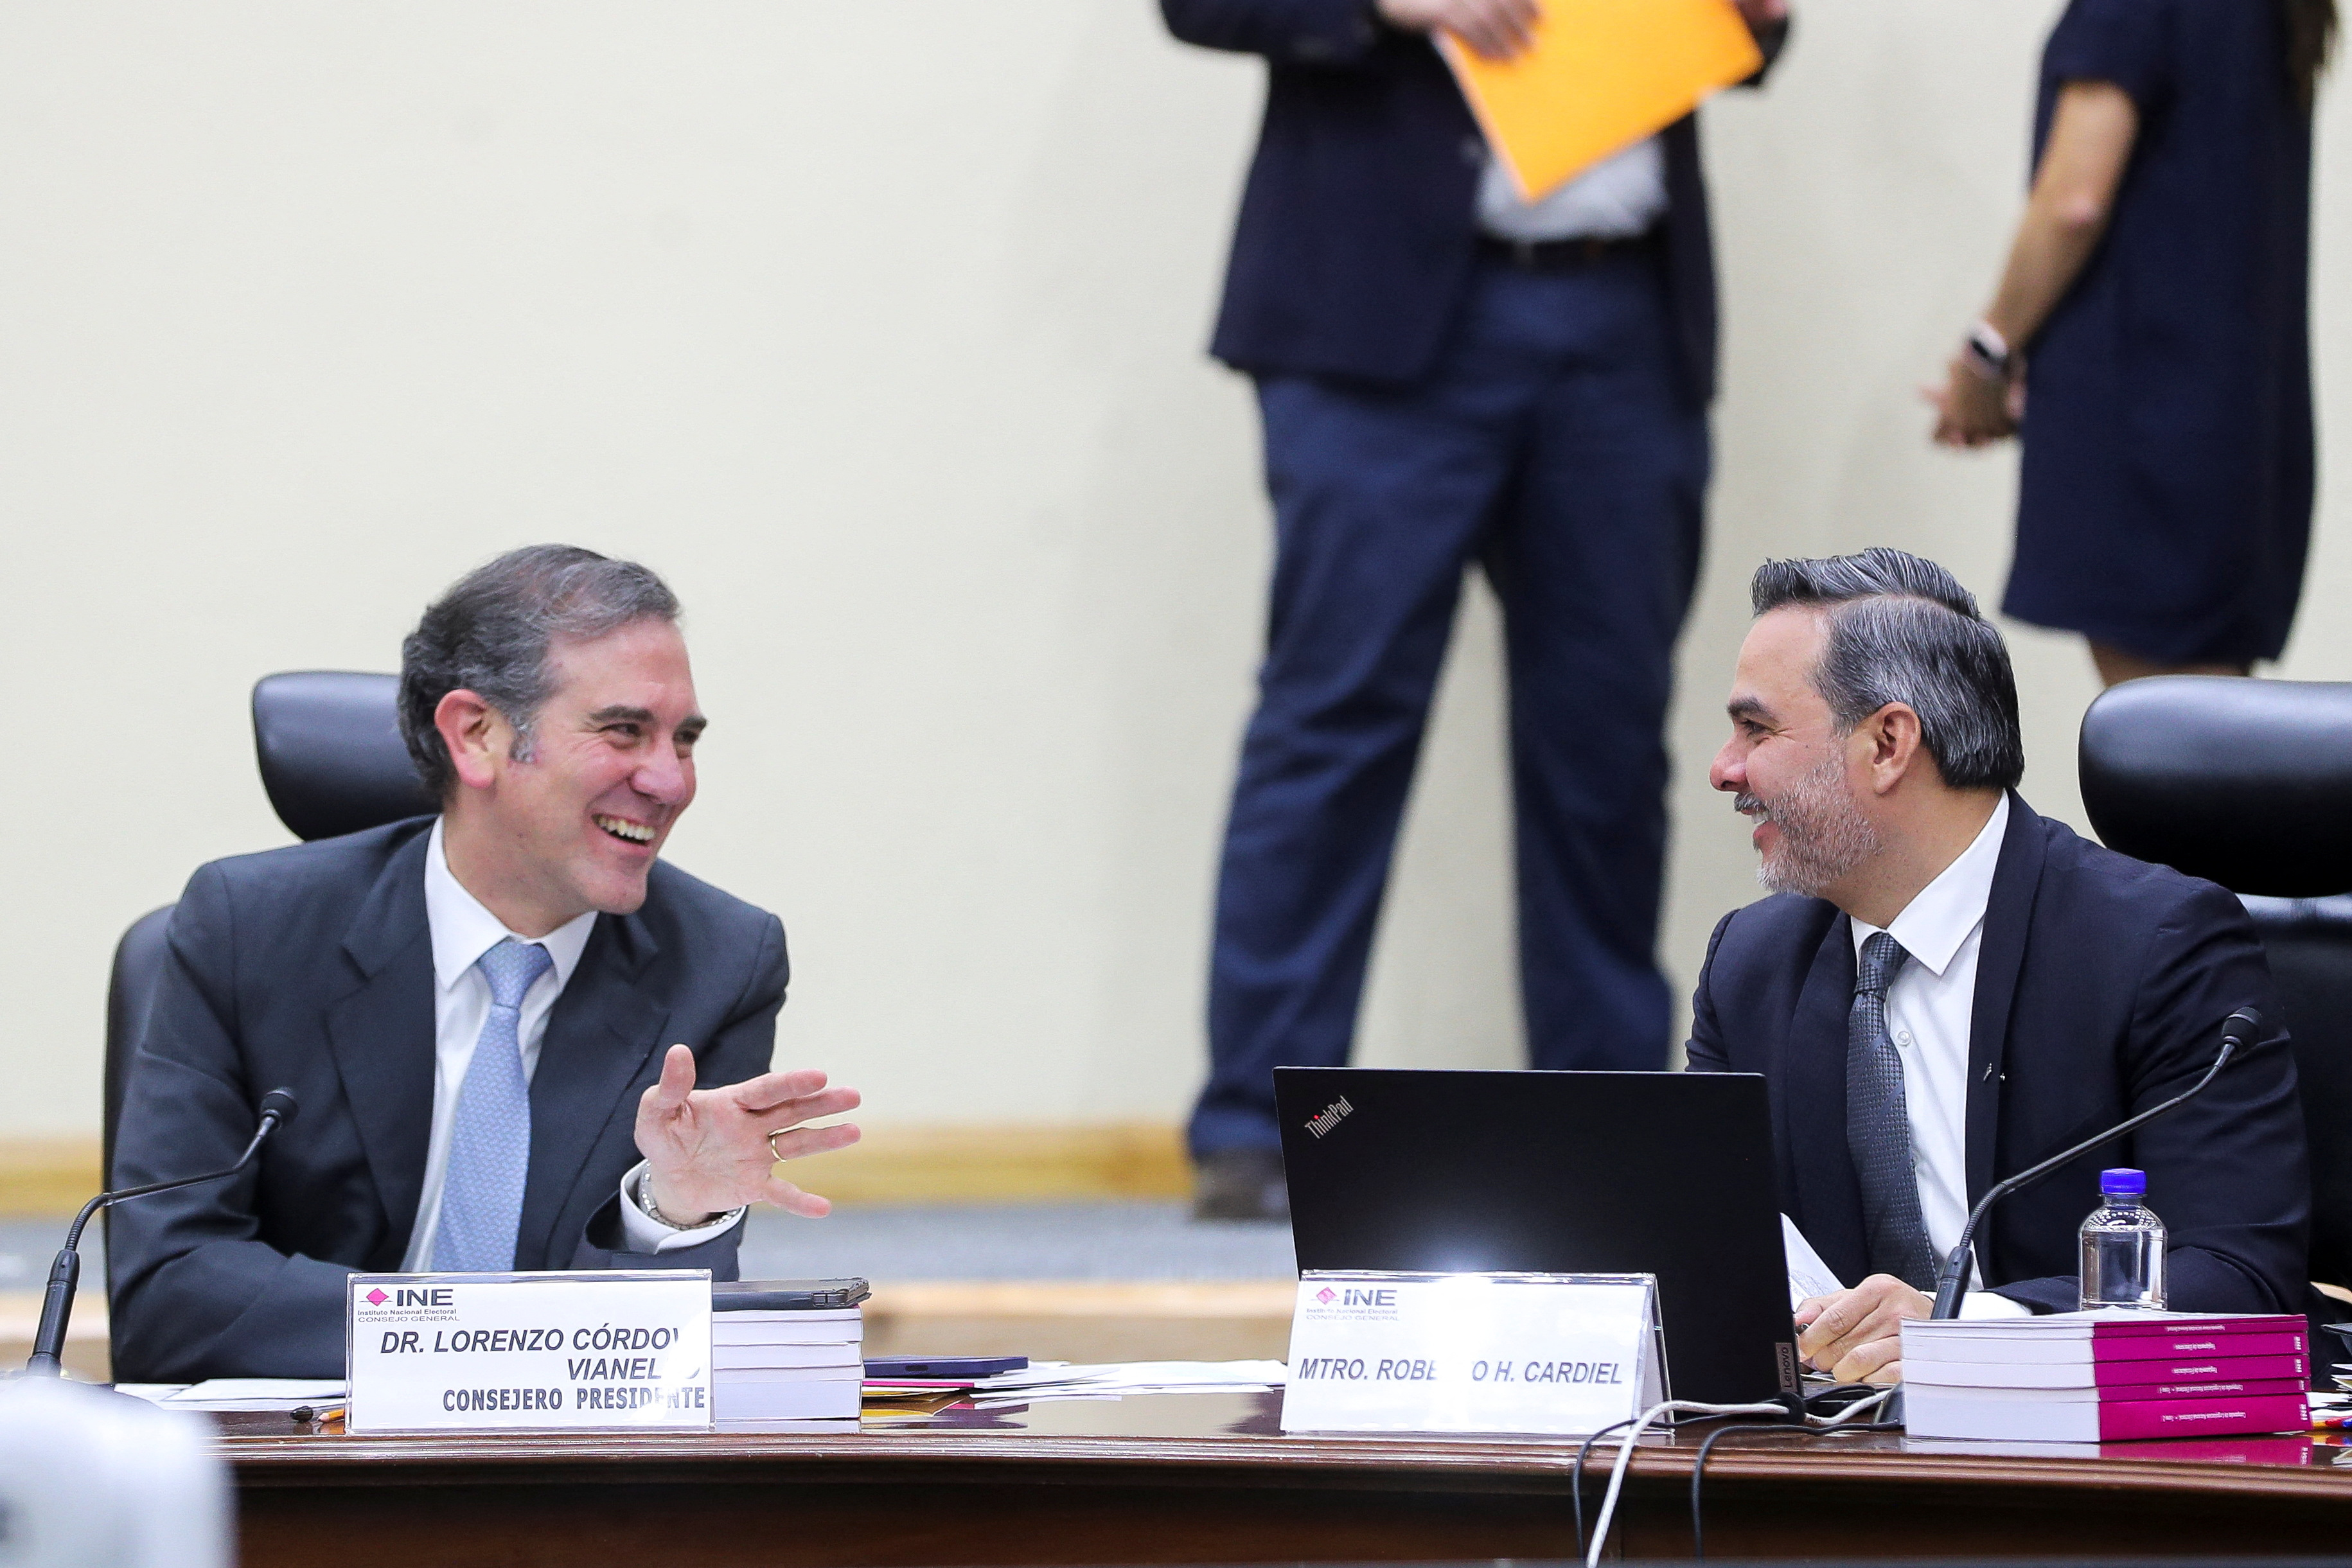 Lorenzo Cordova Vianello, President of the National Electoral Institute (INE), and Roberto Heycher Cardiel Soto, new executive secretary of INE talk during a general council session of the INE in Mexico City, Mexico.  March 3, 2023. REUTERS/Raquel Cunha